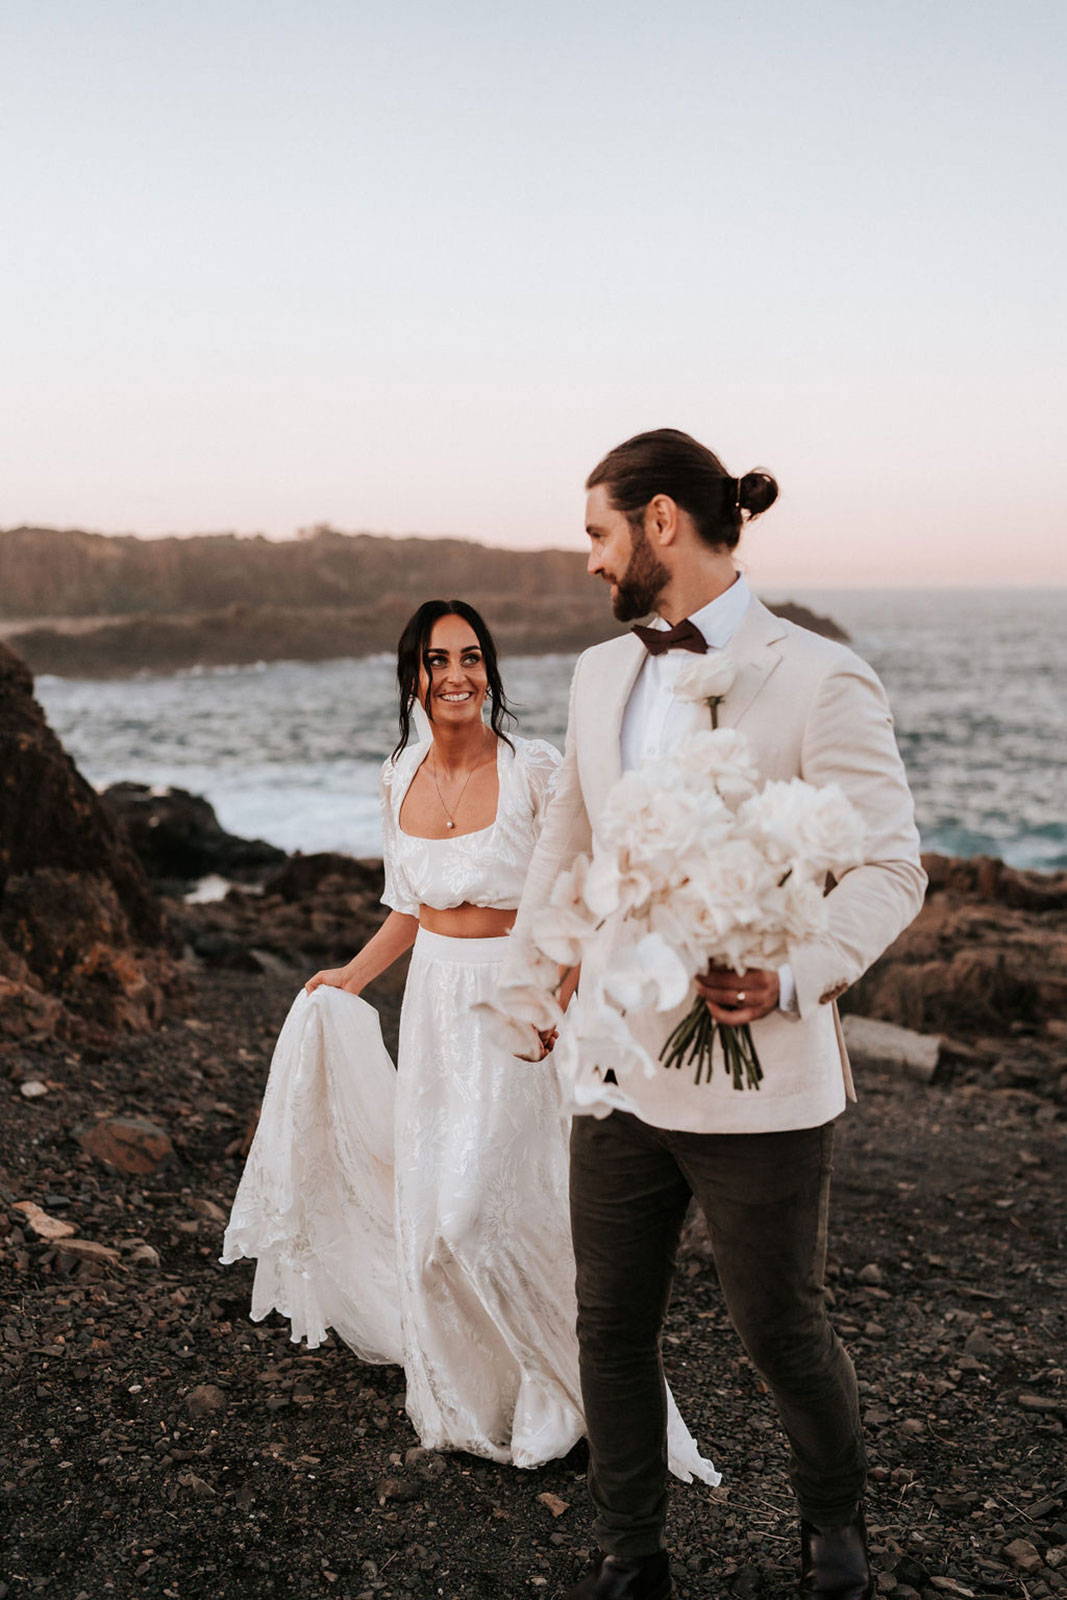 Ellie and James walking with bouquet on Gerringong Beach